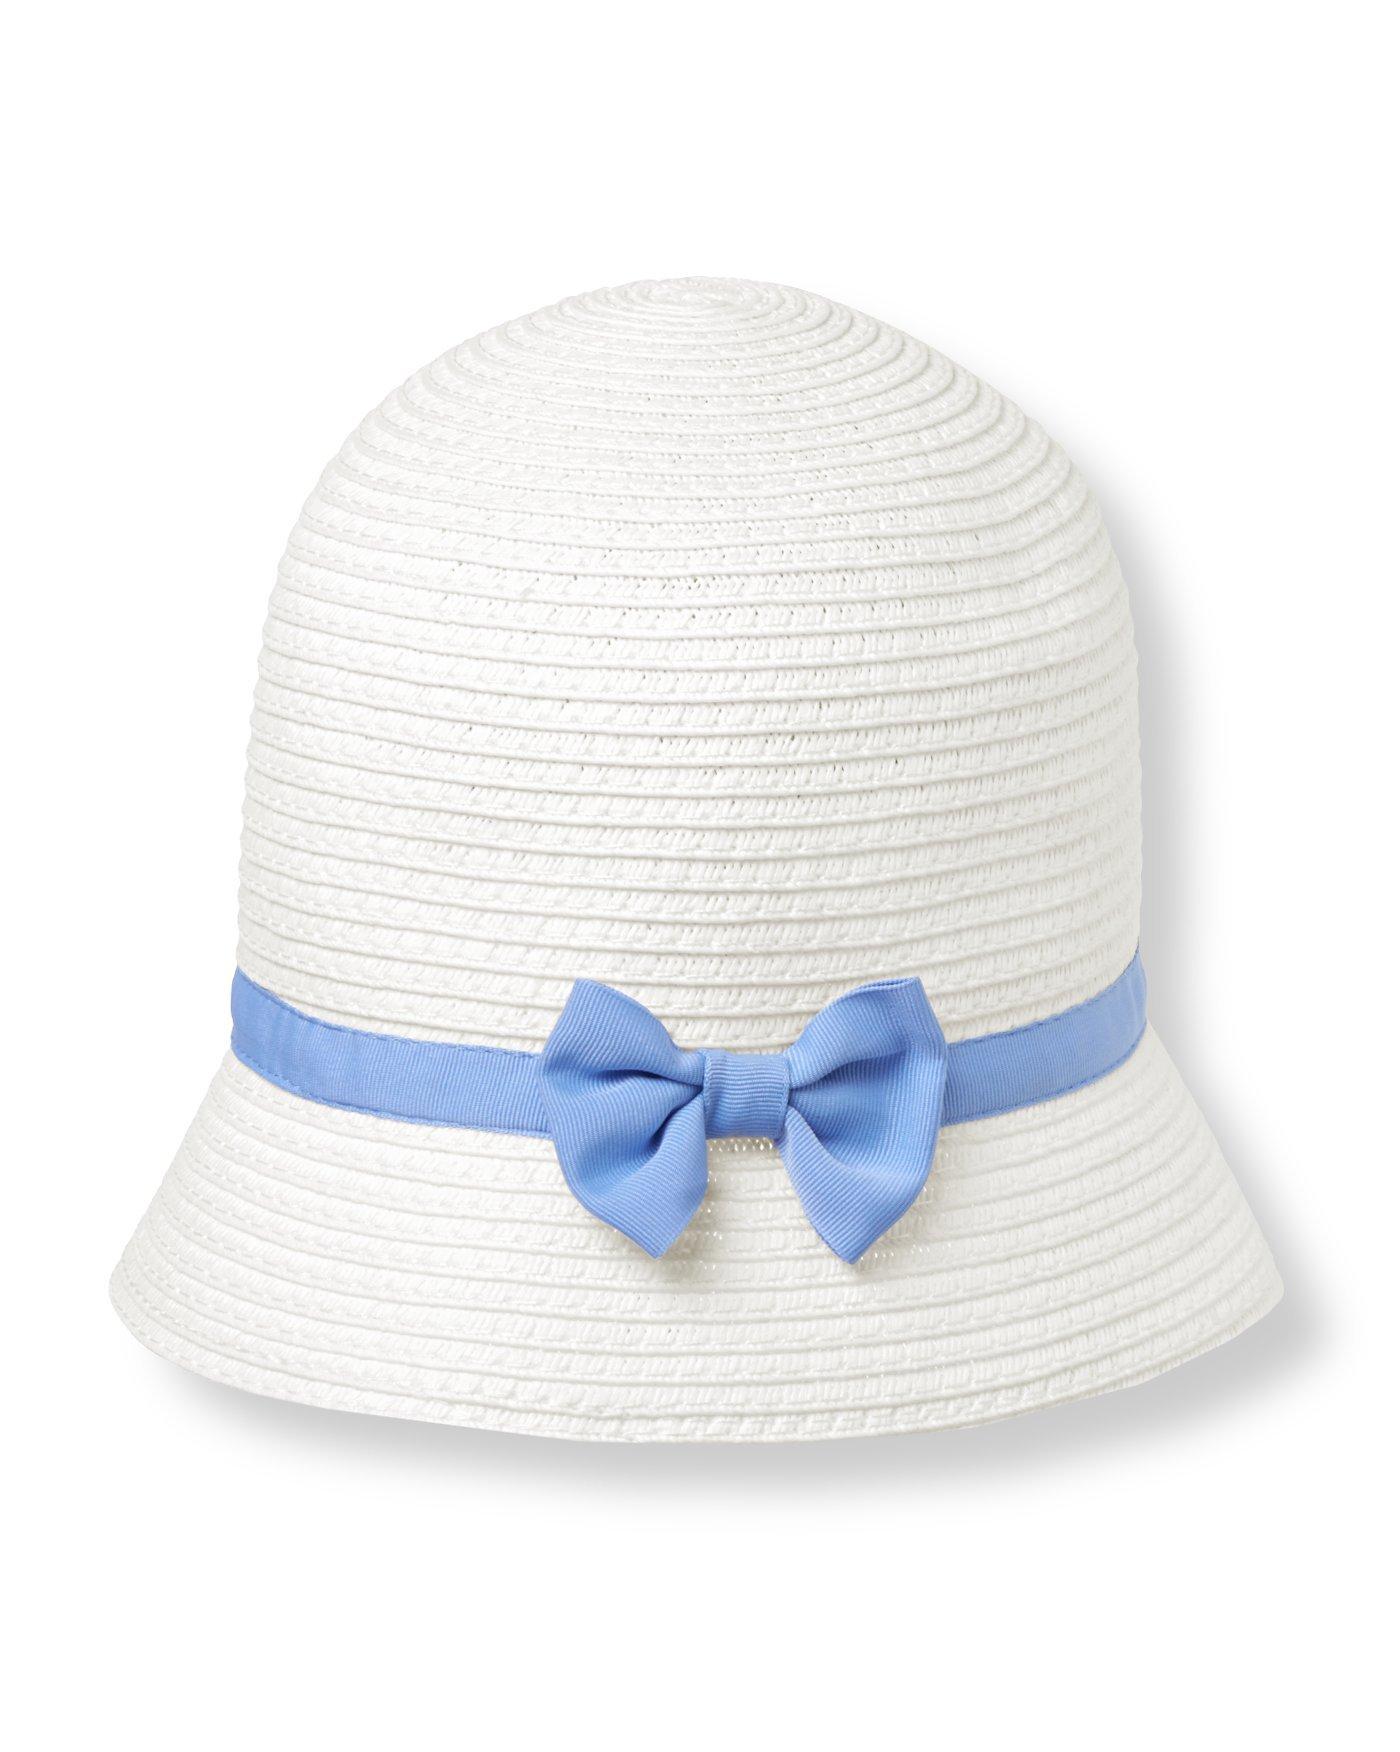 Bow Sunhat image number 1